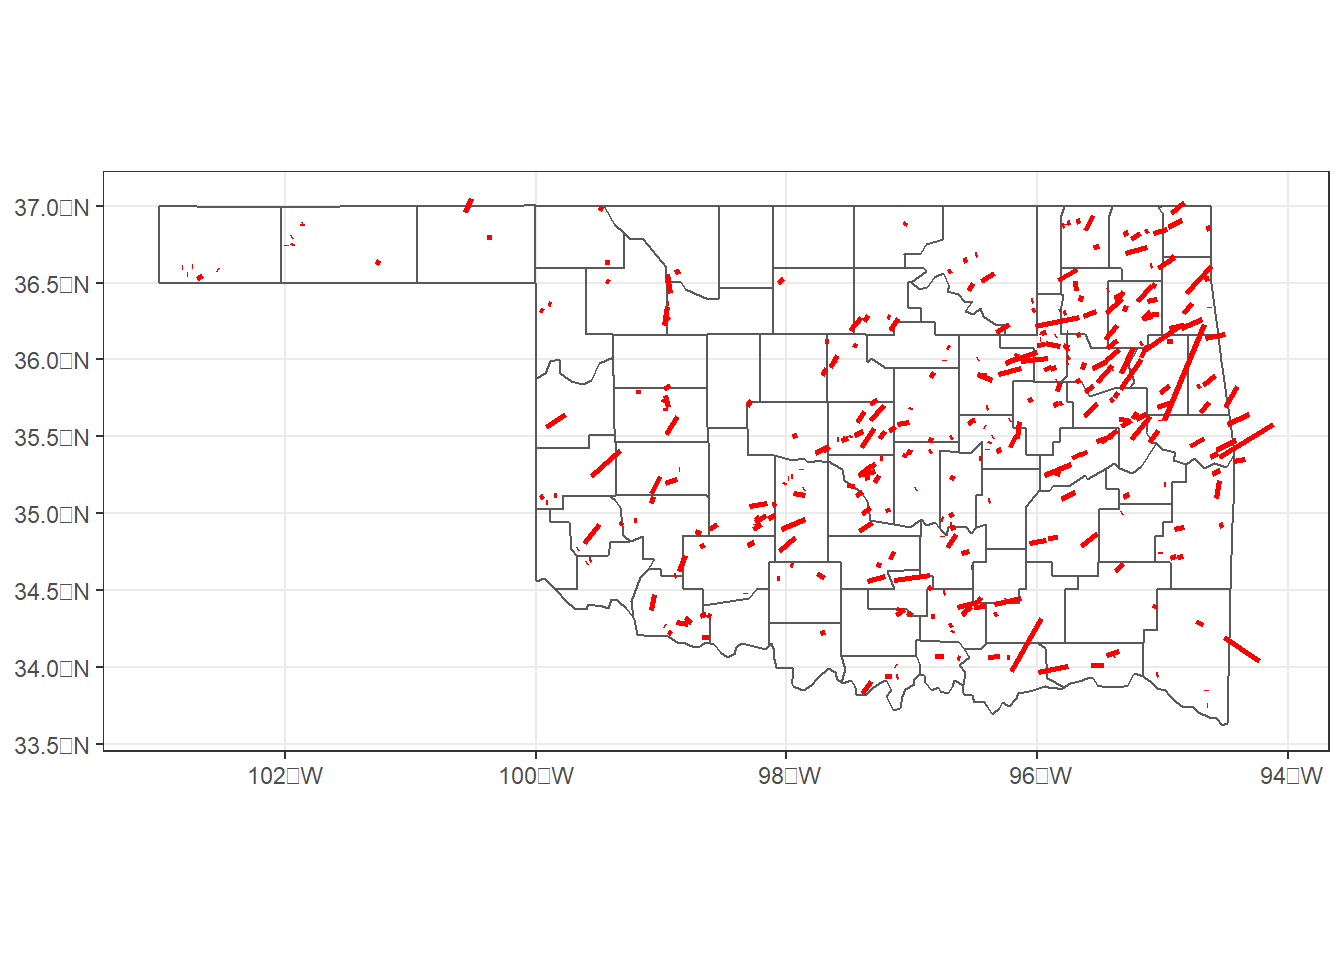 Paths of tornadoes in Oklahoma from 2016-2021.